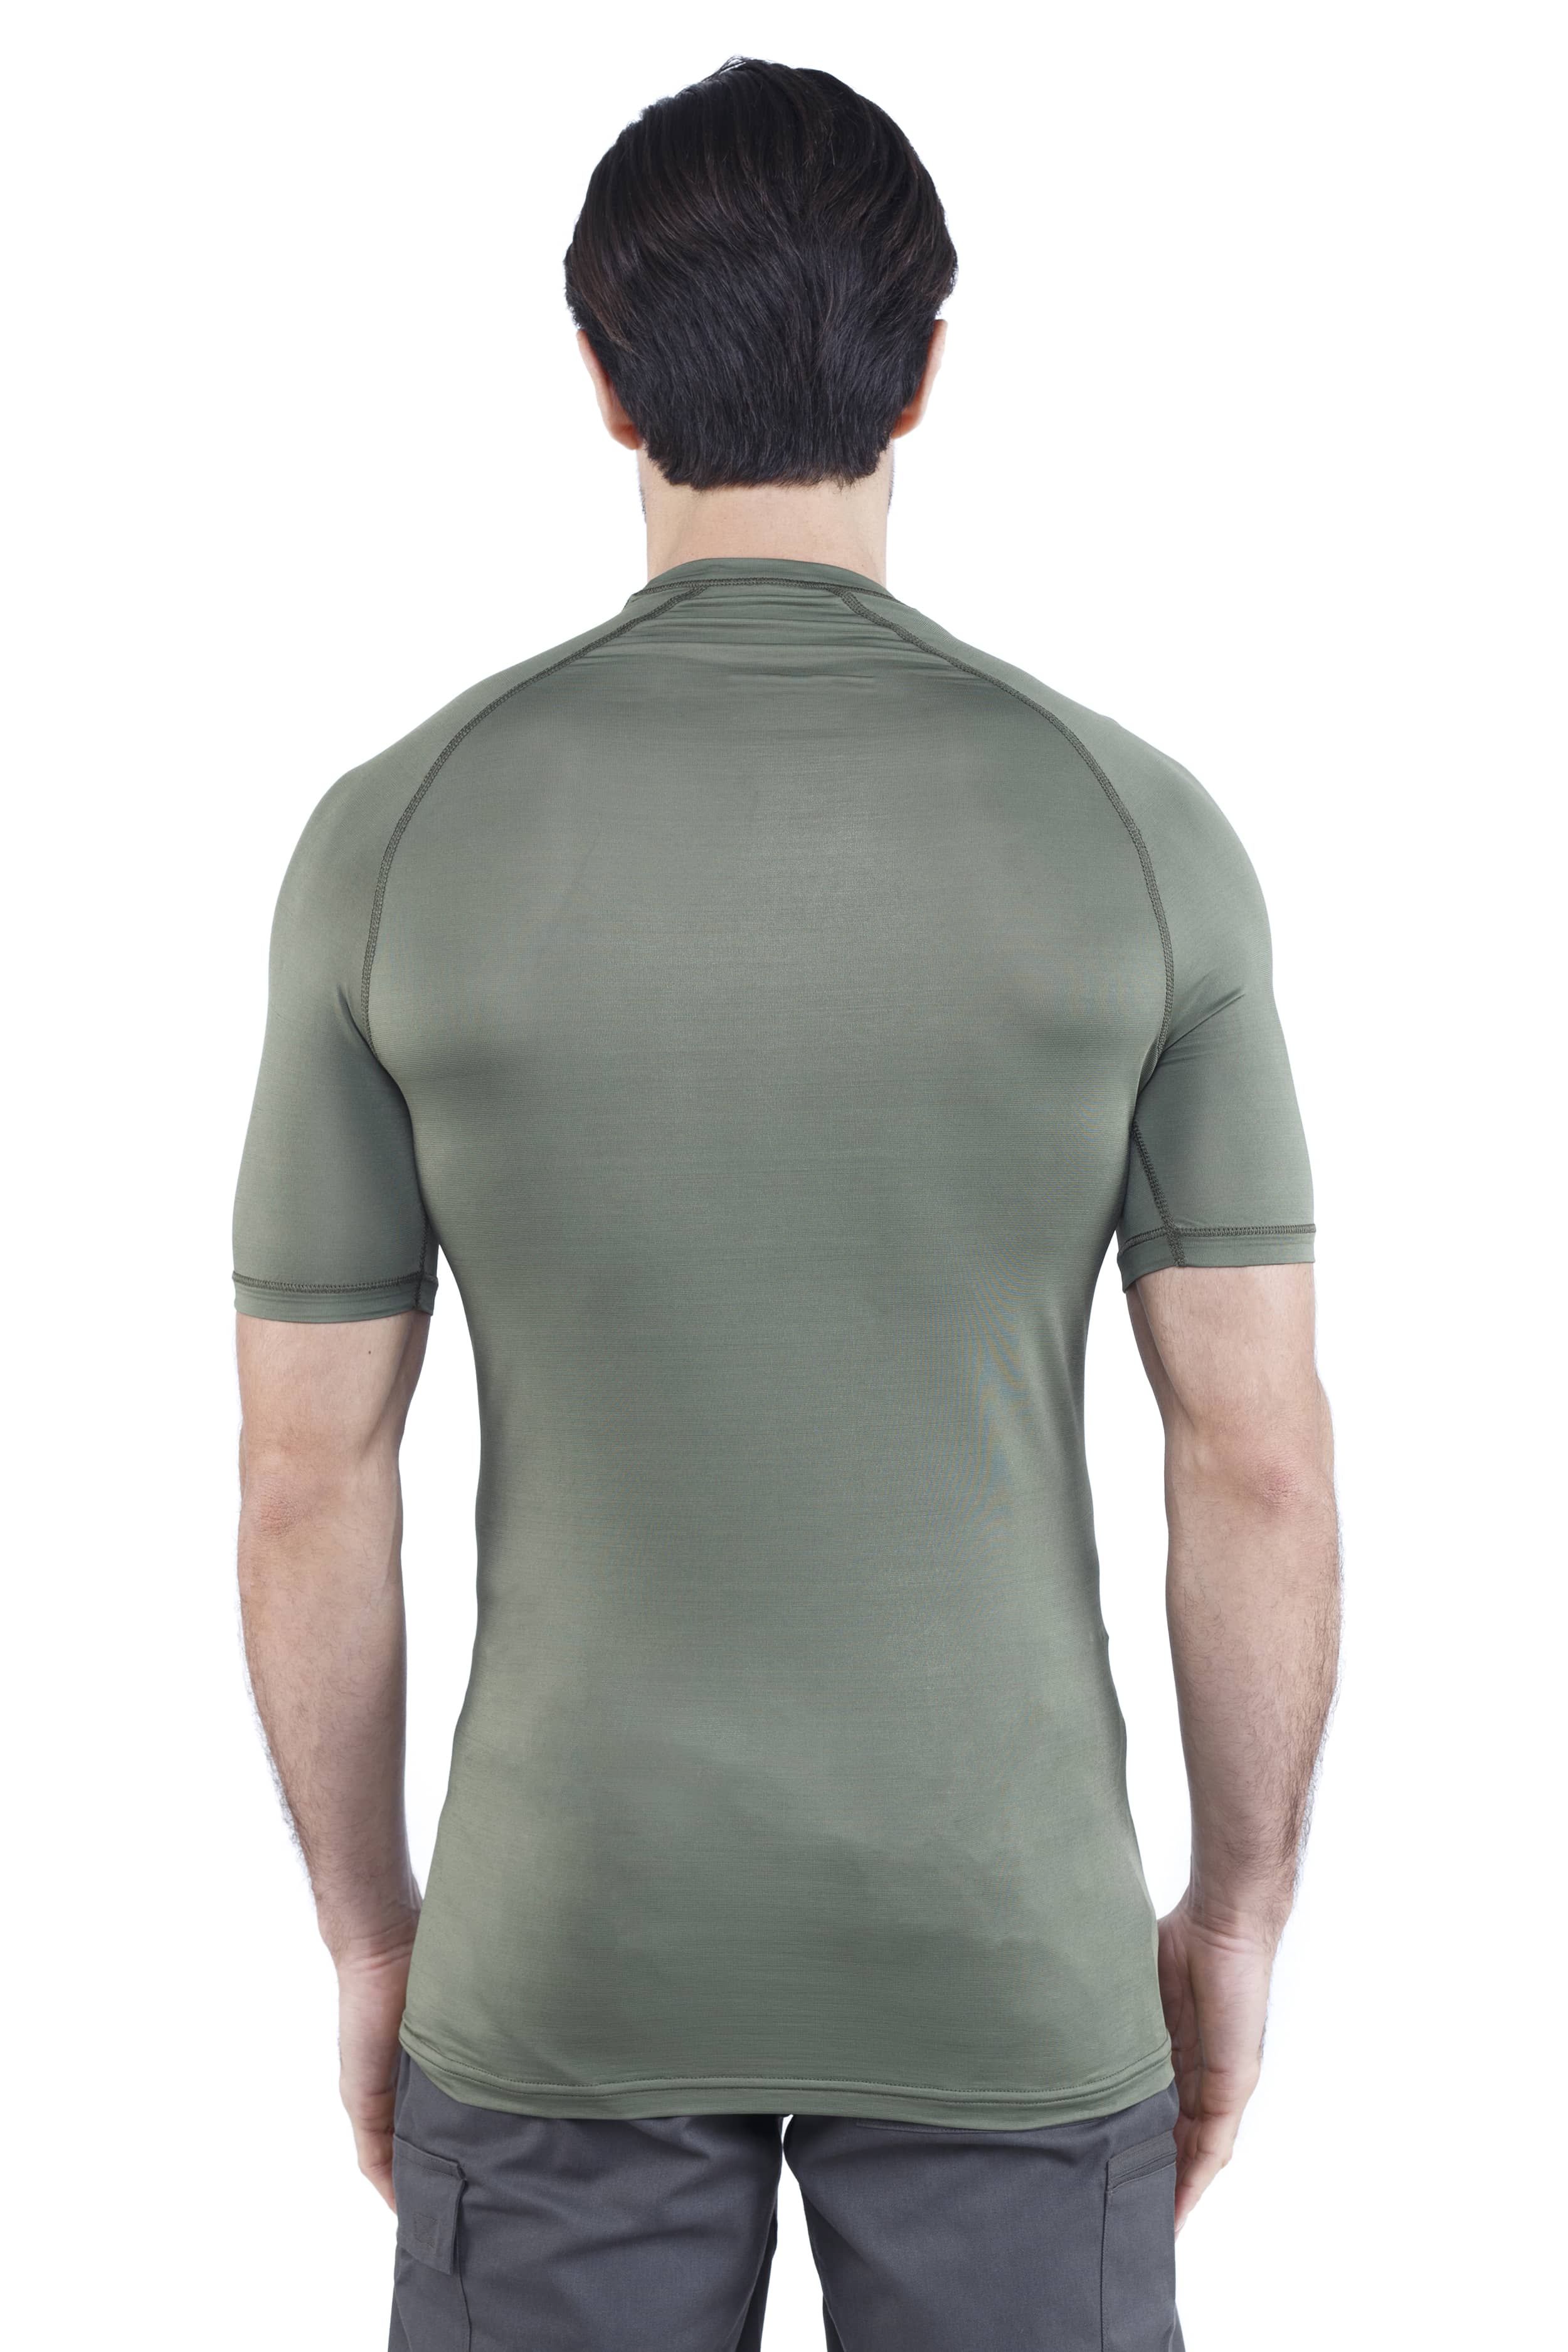 ARMY FIREPROOF COMBAT T-SHIRT